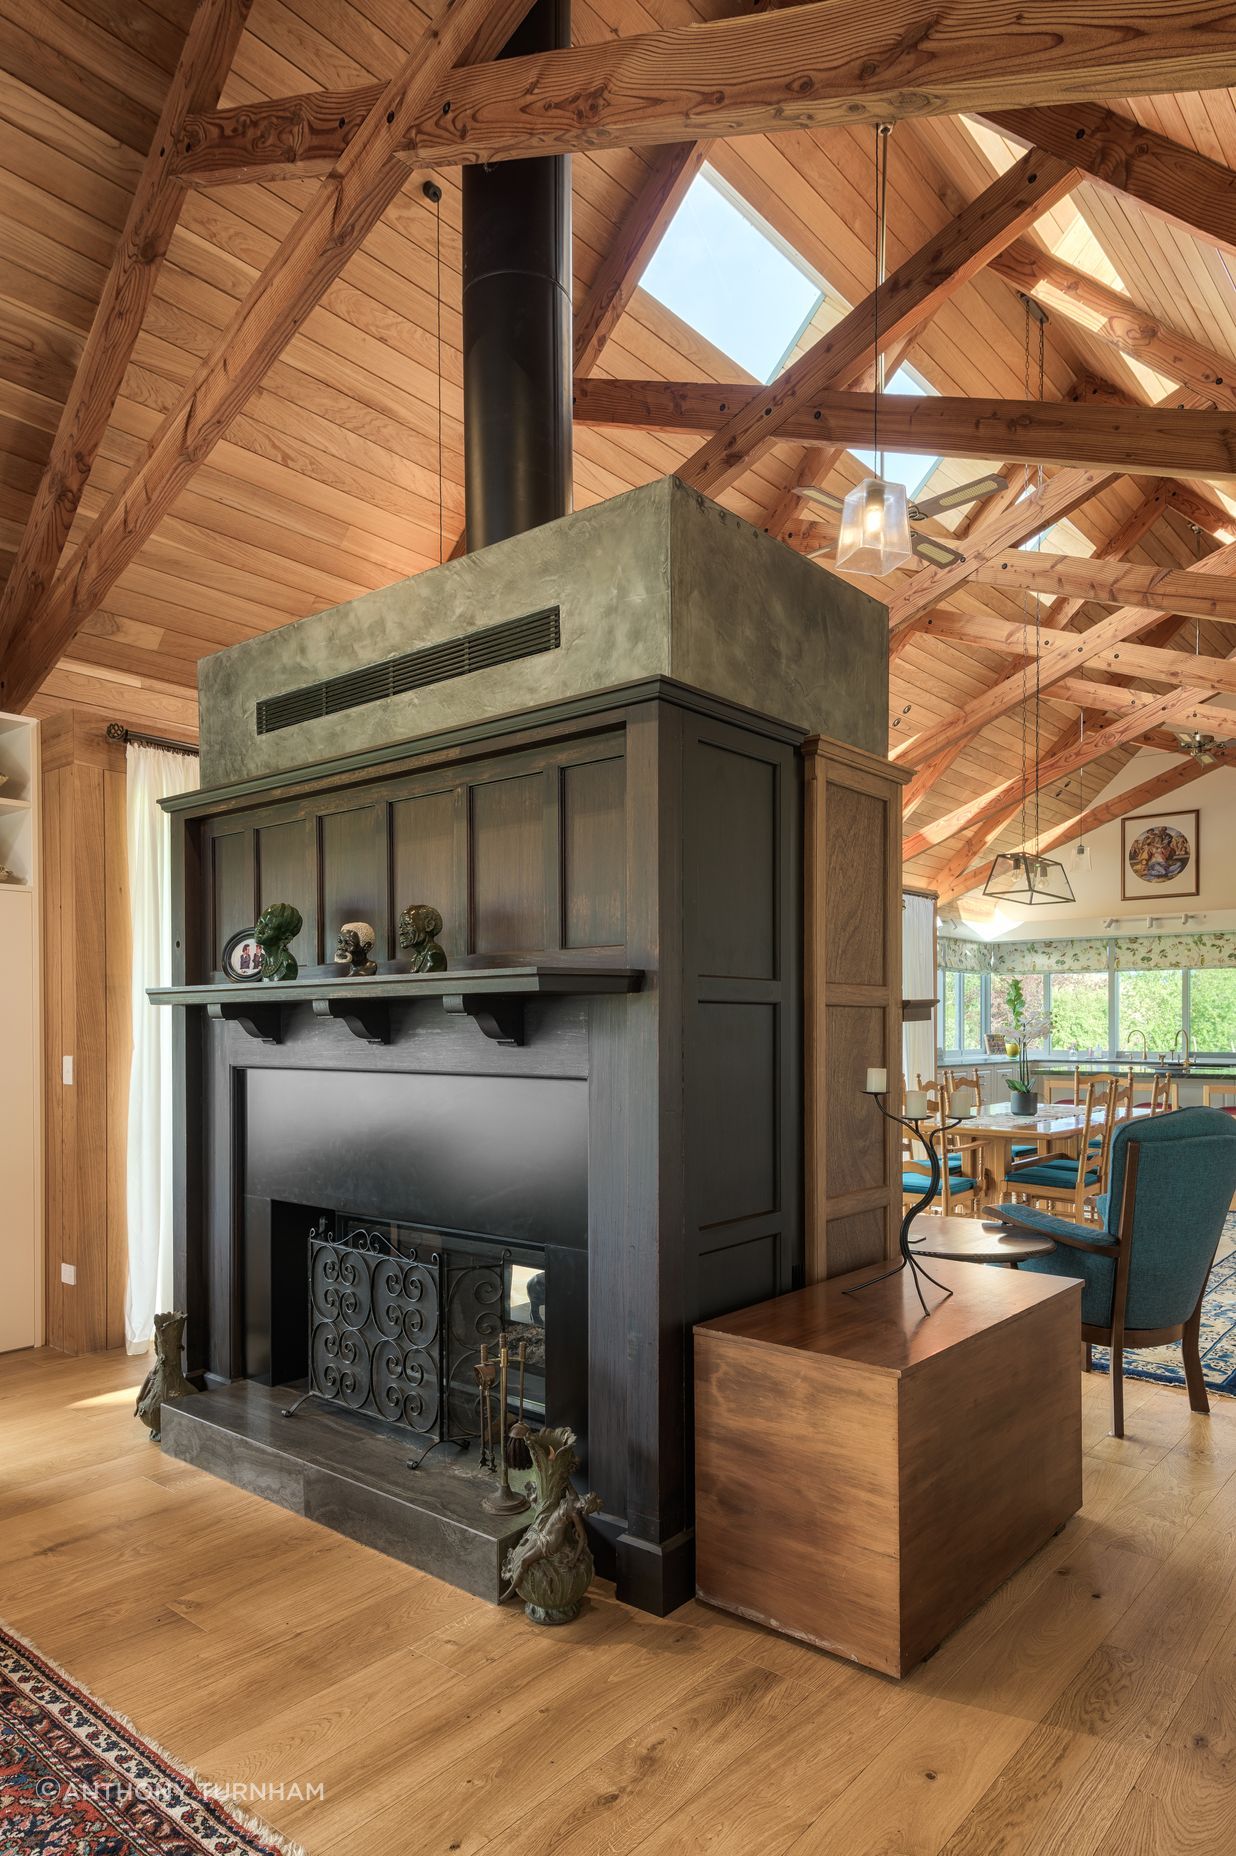 “The fireplace in the main living area has the original timber surround, to give the house that connection with the past.” The panelling was stamped with “Made in Japan”, says Chris. “That was in the 1920s, which is extraordinary.”